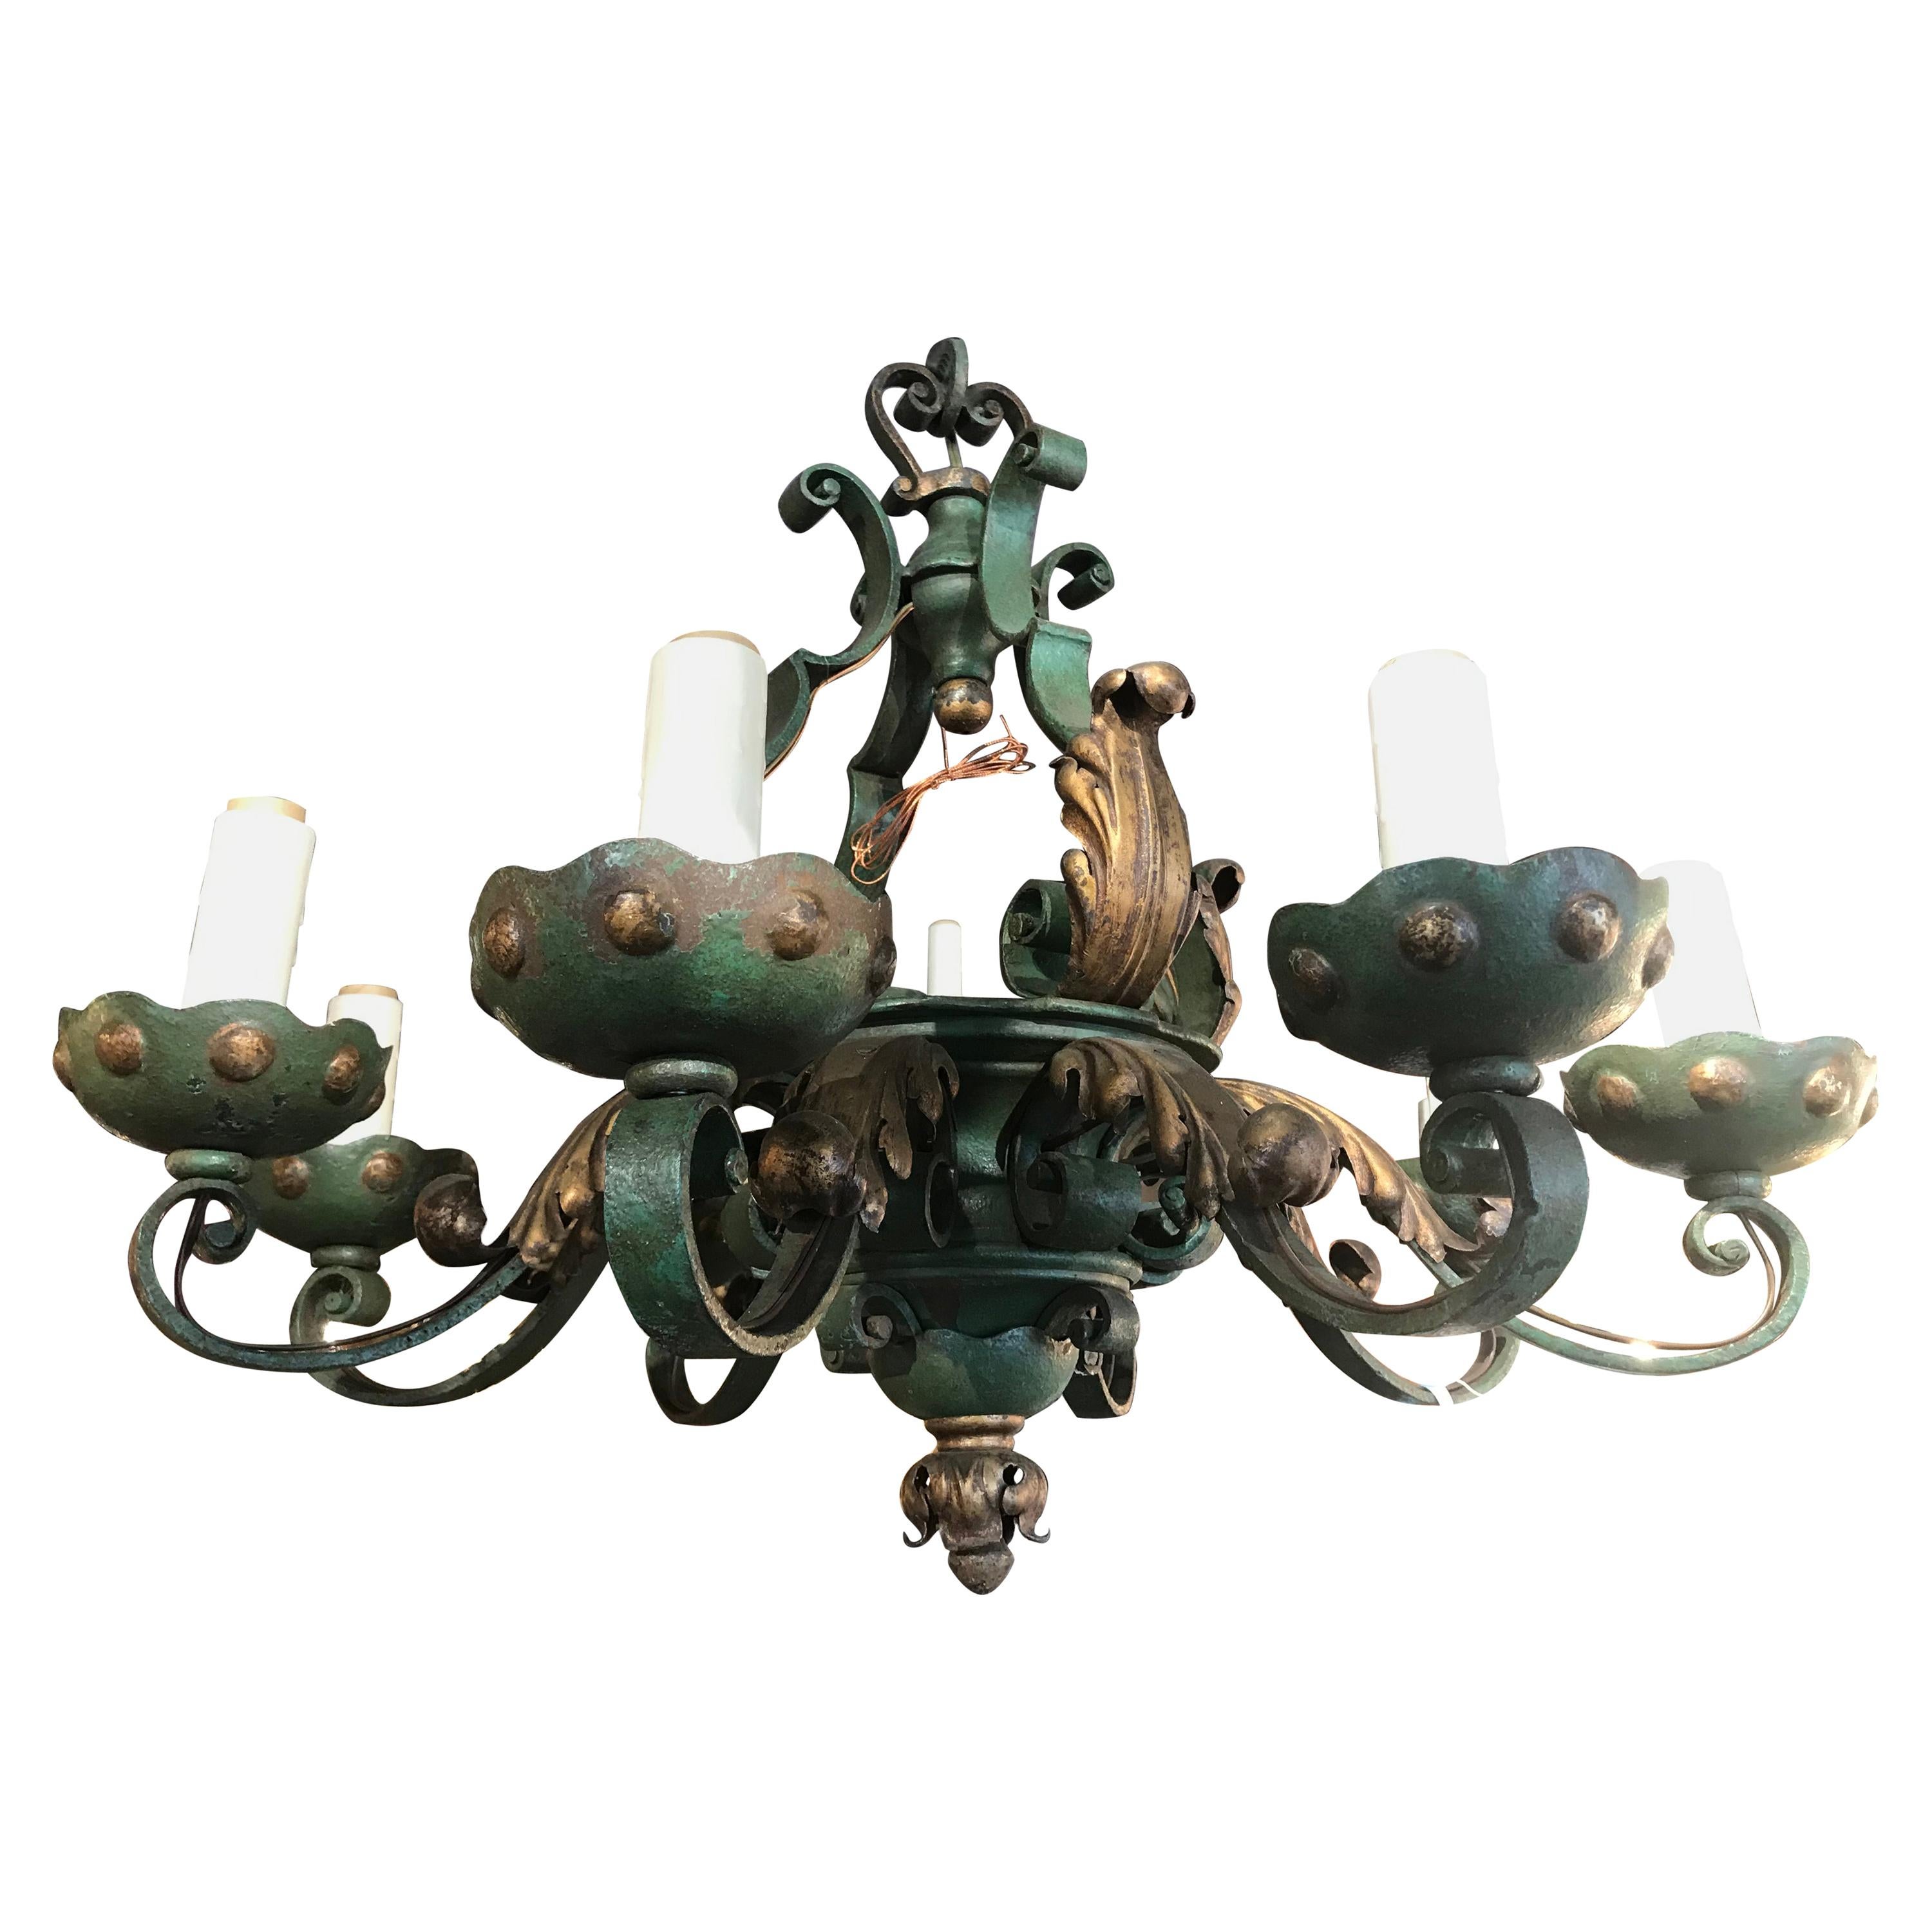 Iron Chandelier For Sale